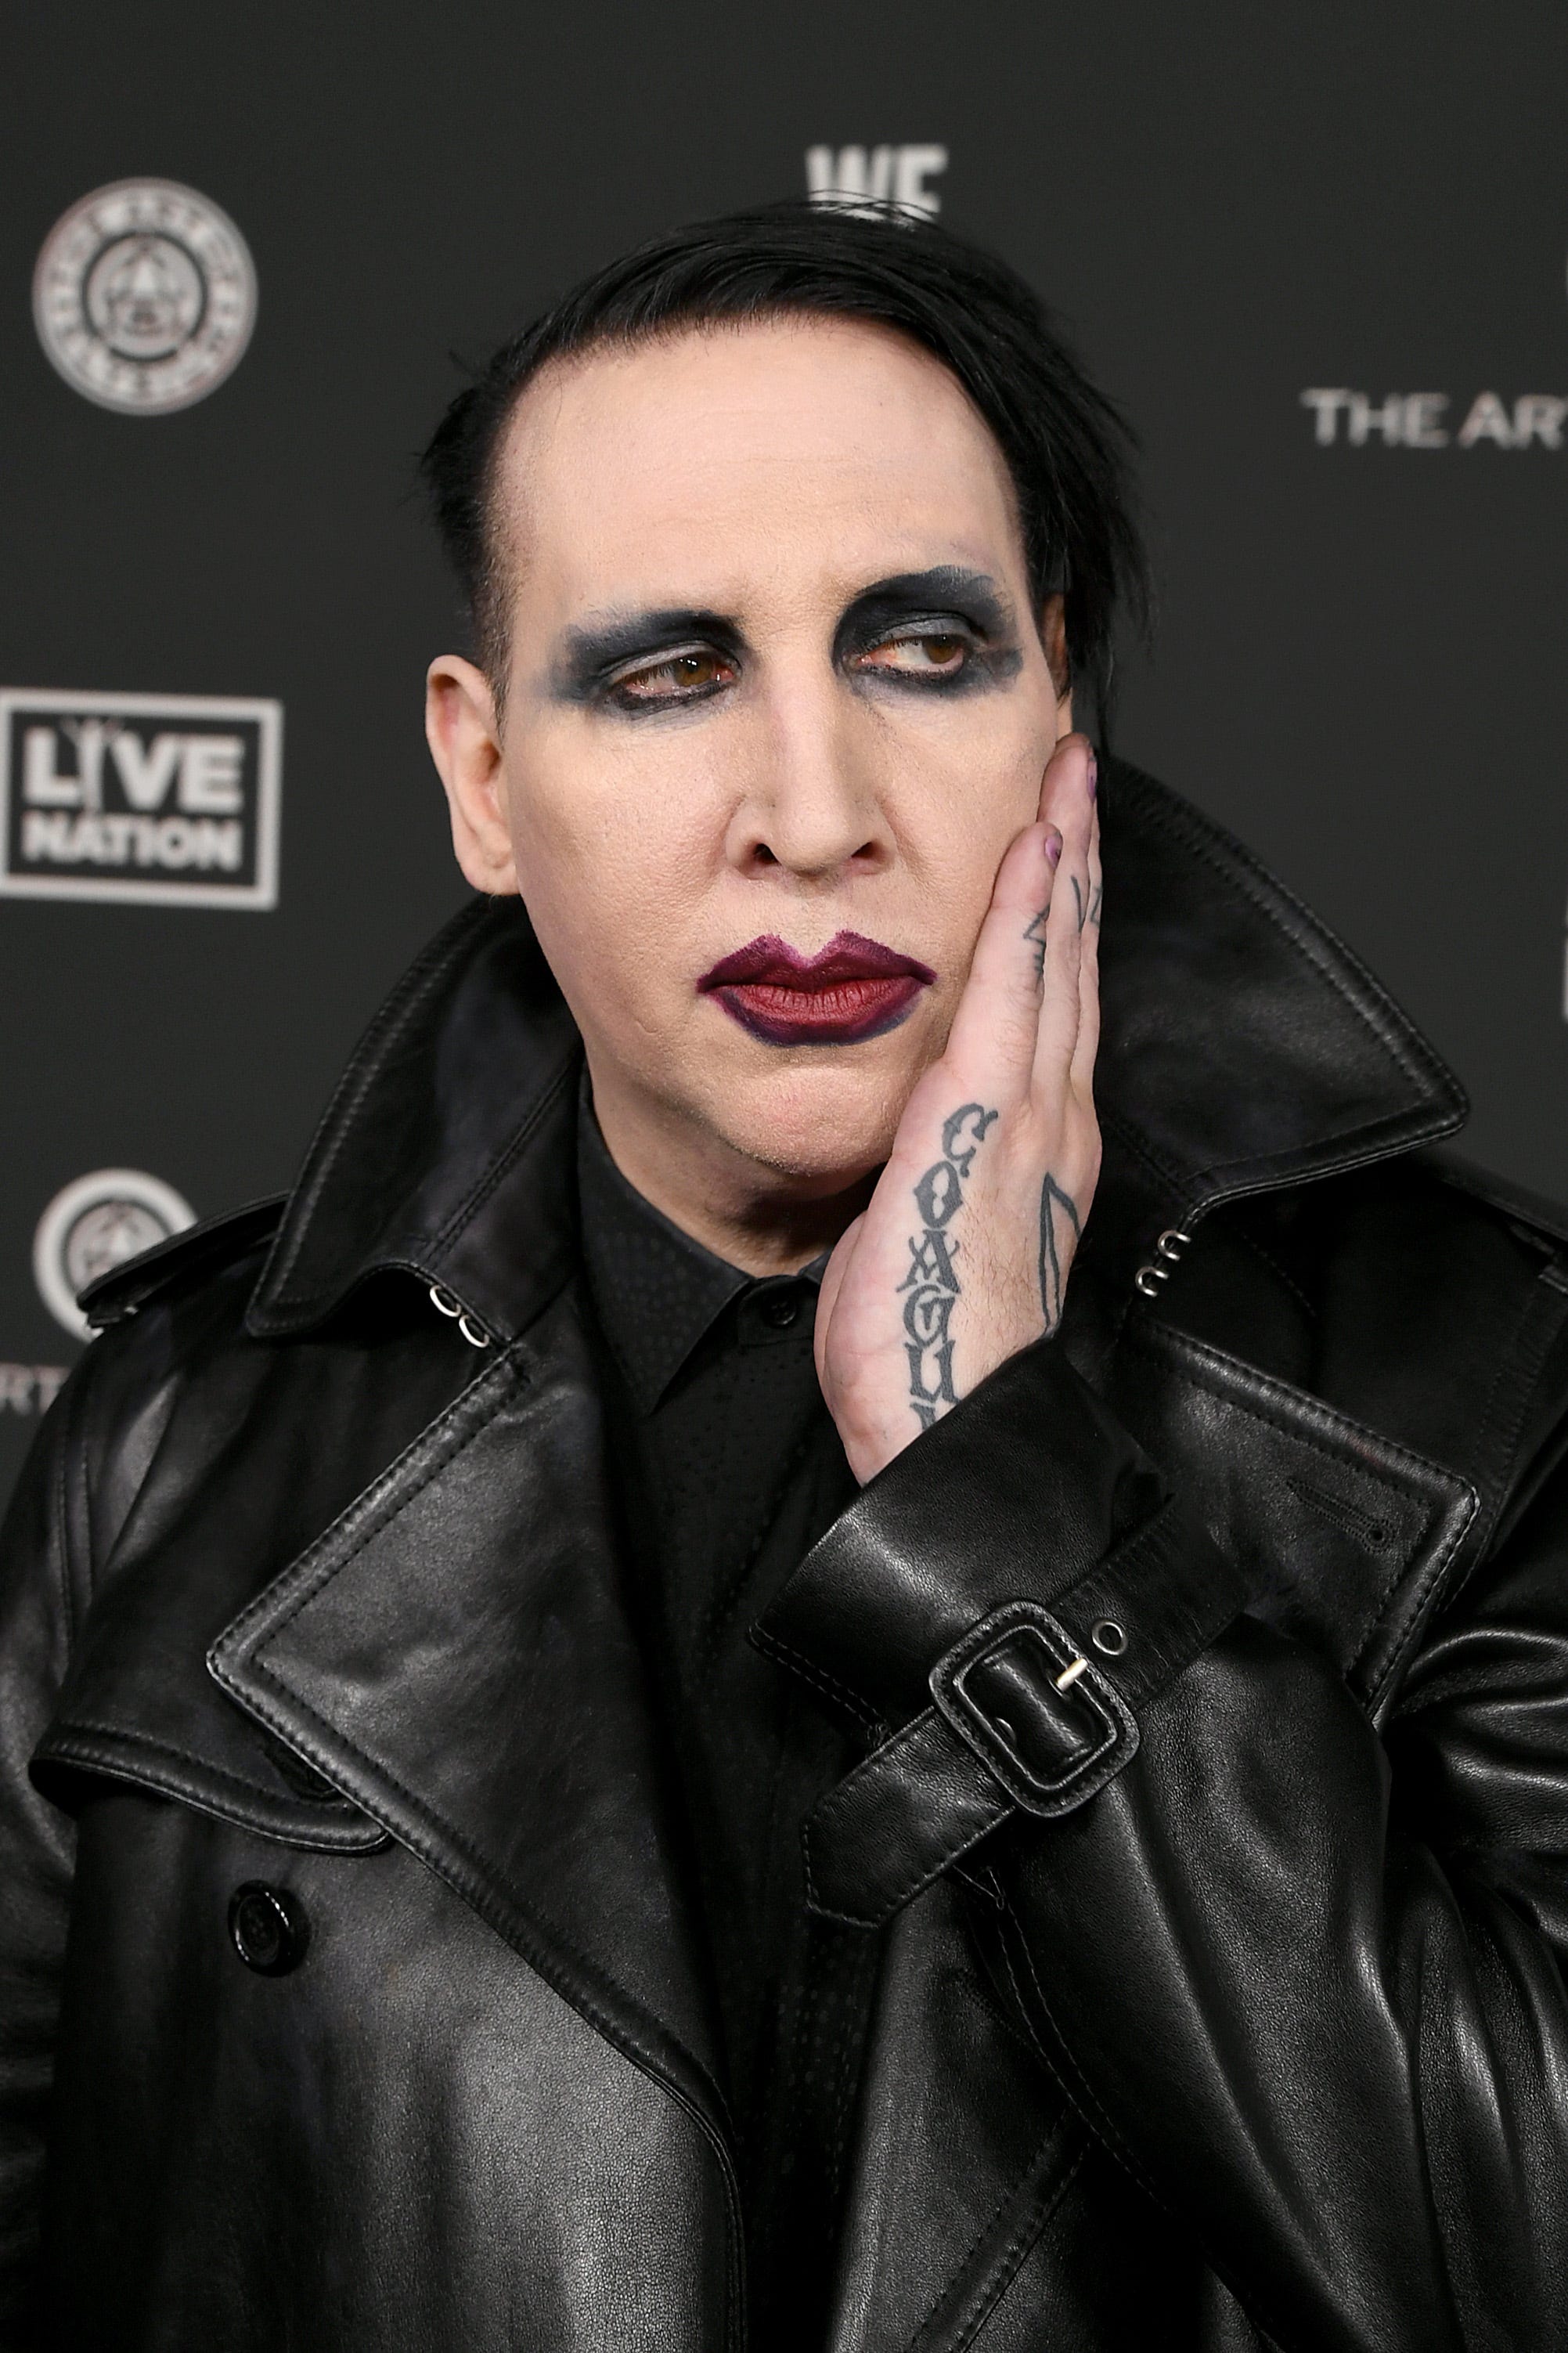 Marilyn Manson sued for sexual assault of a minor: Timeline of his troubled legal history